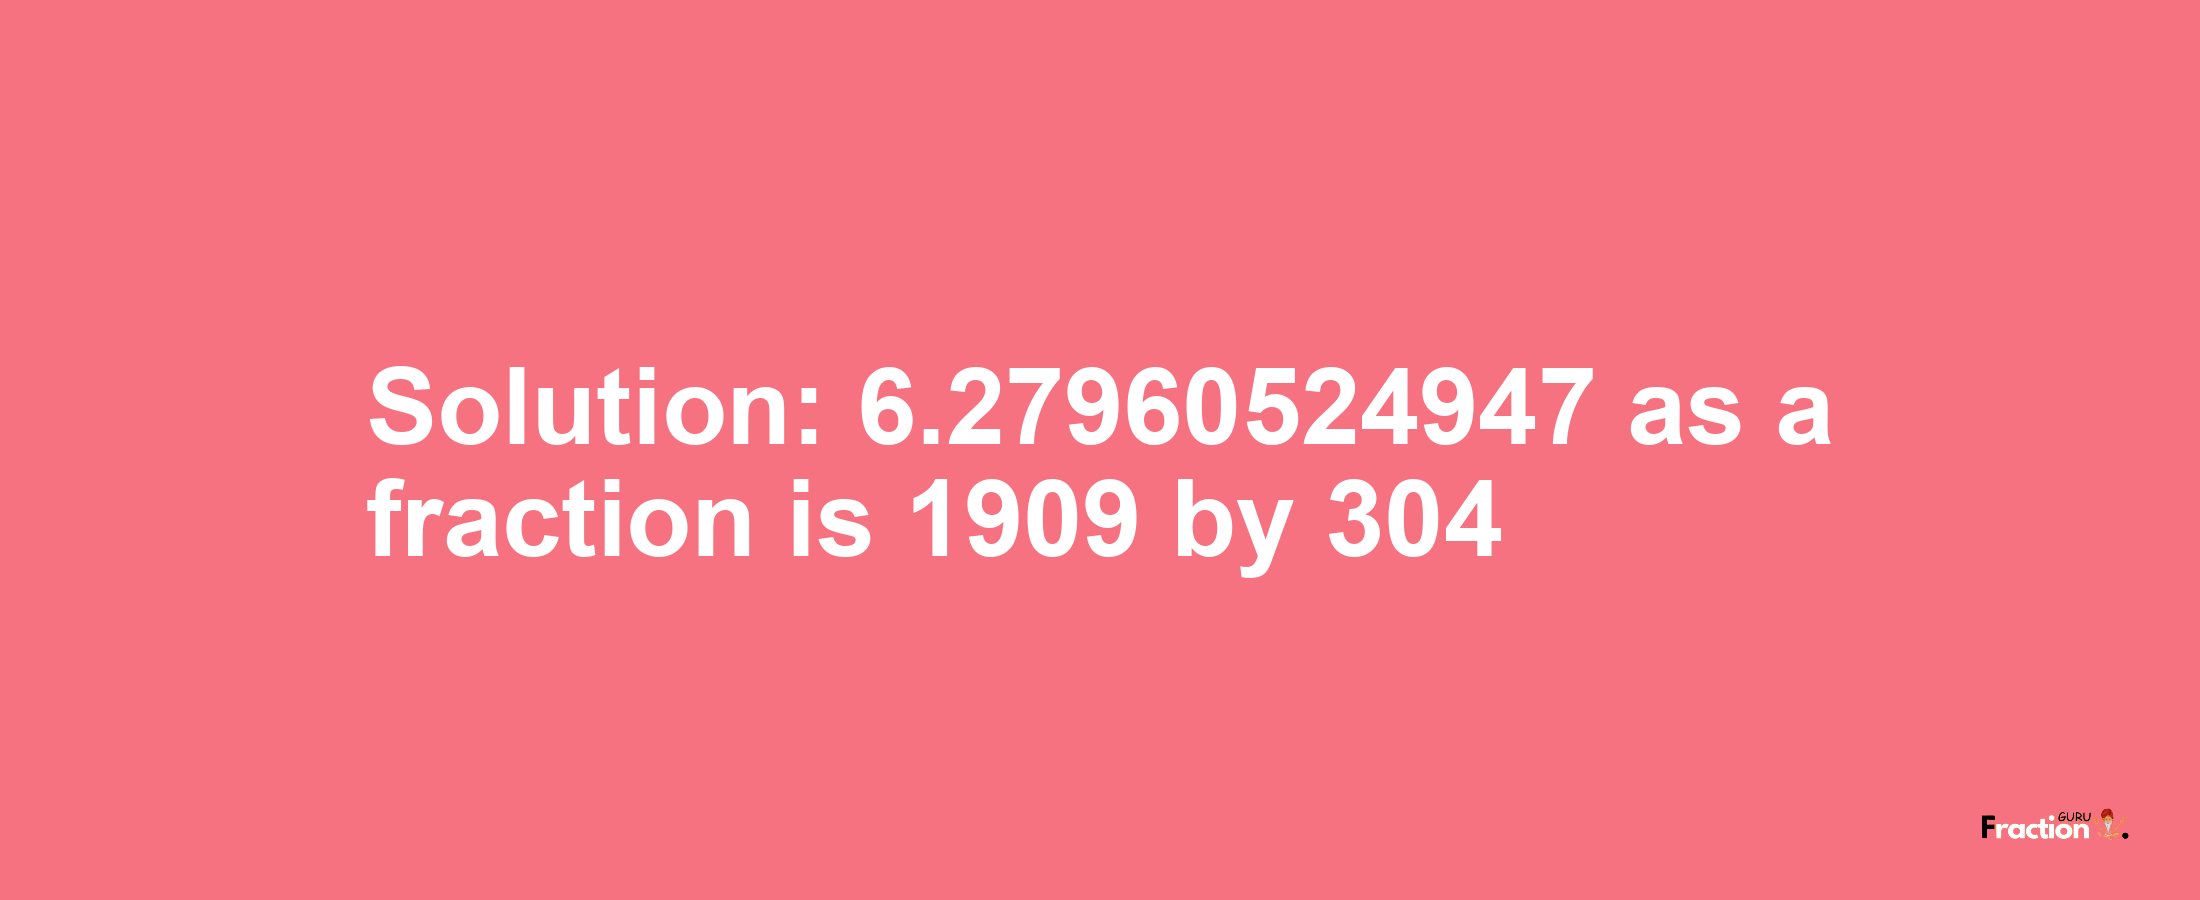 Solution:6.27960524947 as a fraction is 1909/304